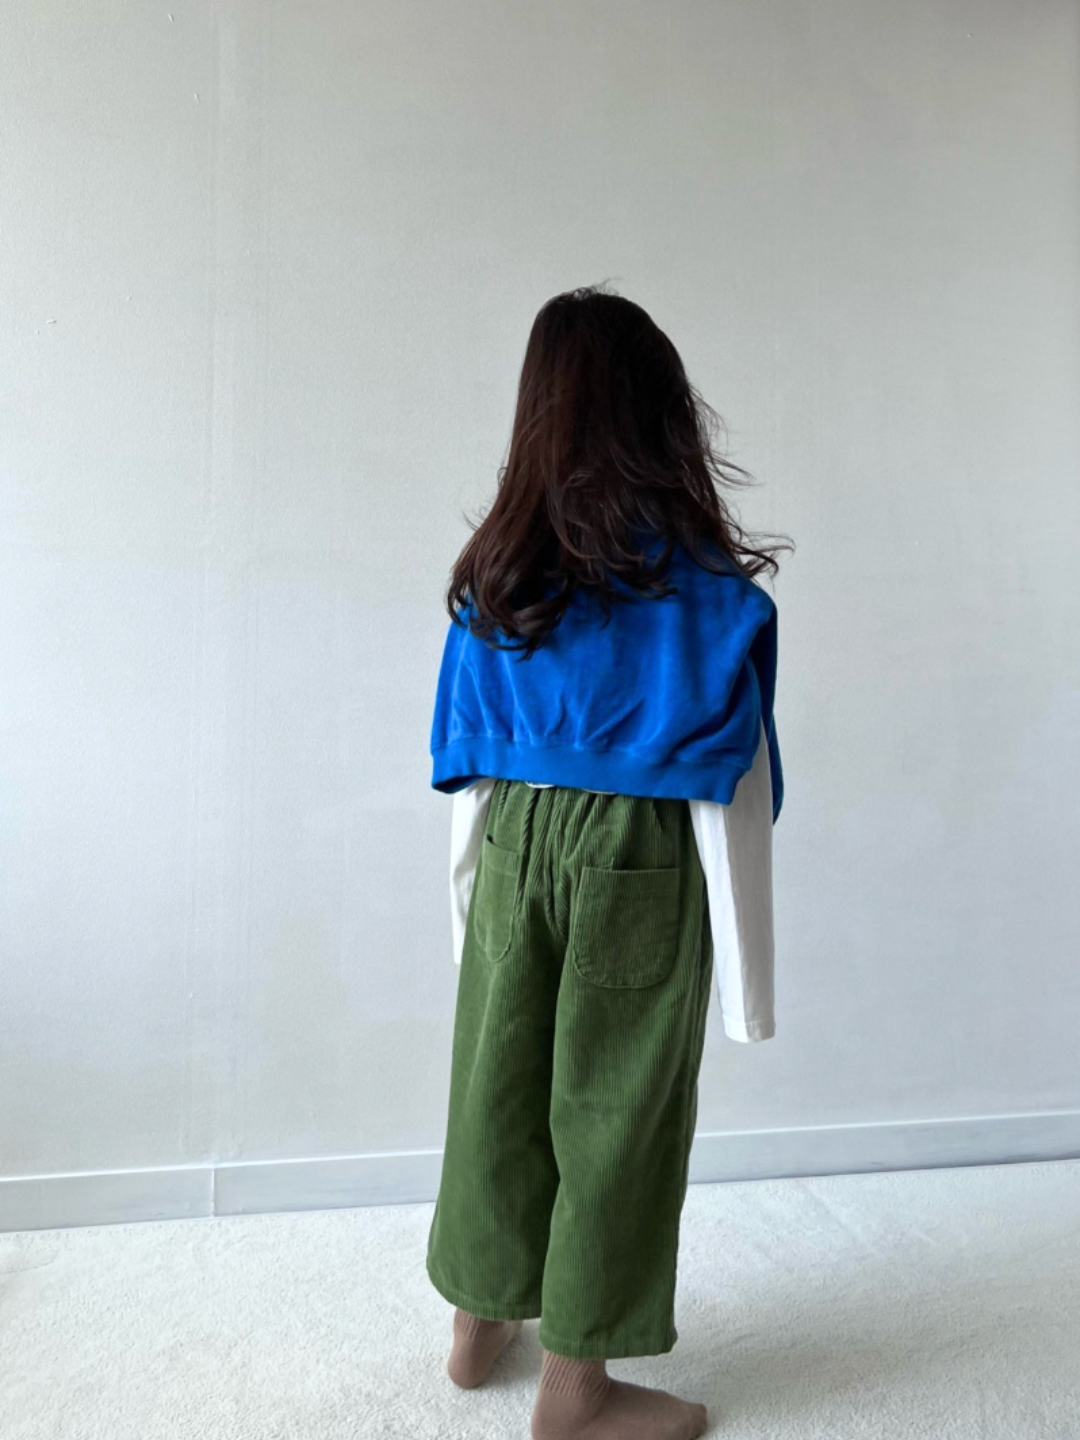 A girl wearing kids wide-leg corduroy pants in moss green, paired with a white t-shirt with three stripes in pink, red and green. A royal blue sweater is draped over her shoulders. She is standing on grey carpet with a white wall behind her, and facing backwards, showing the back view of the pants.